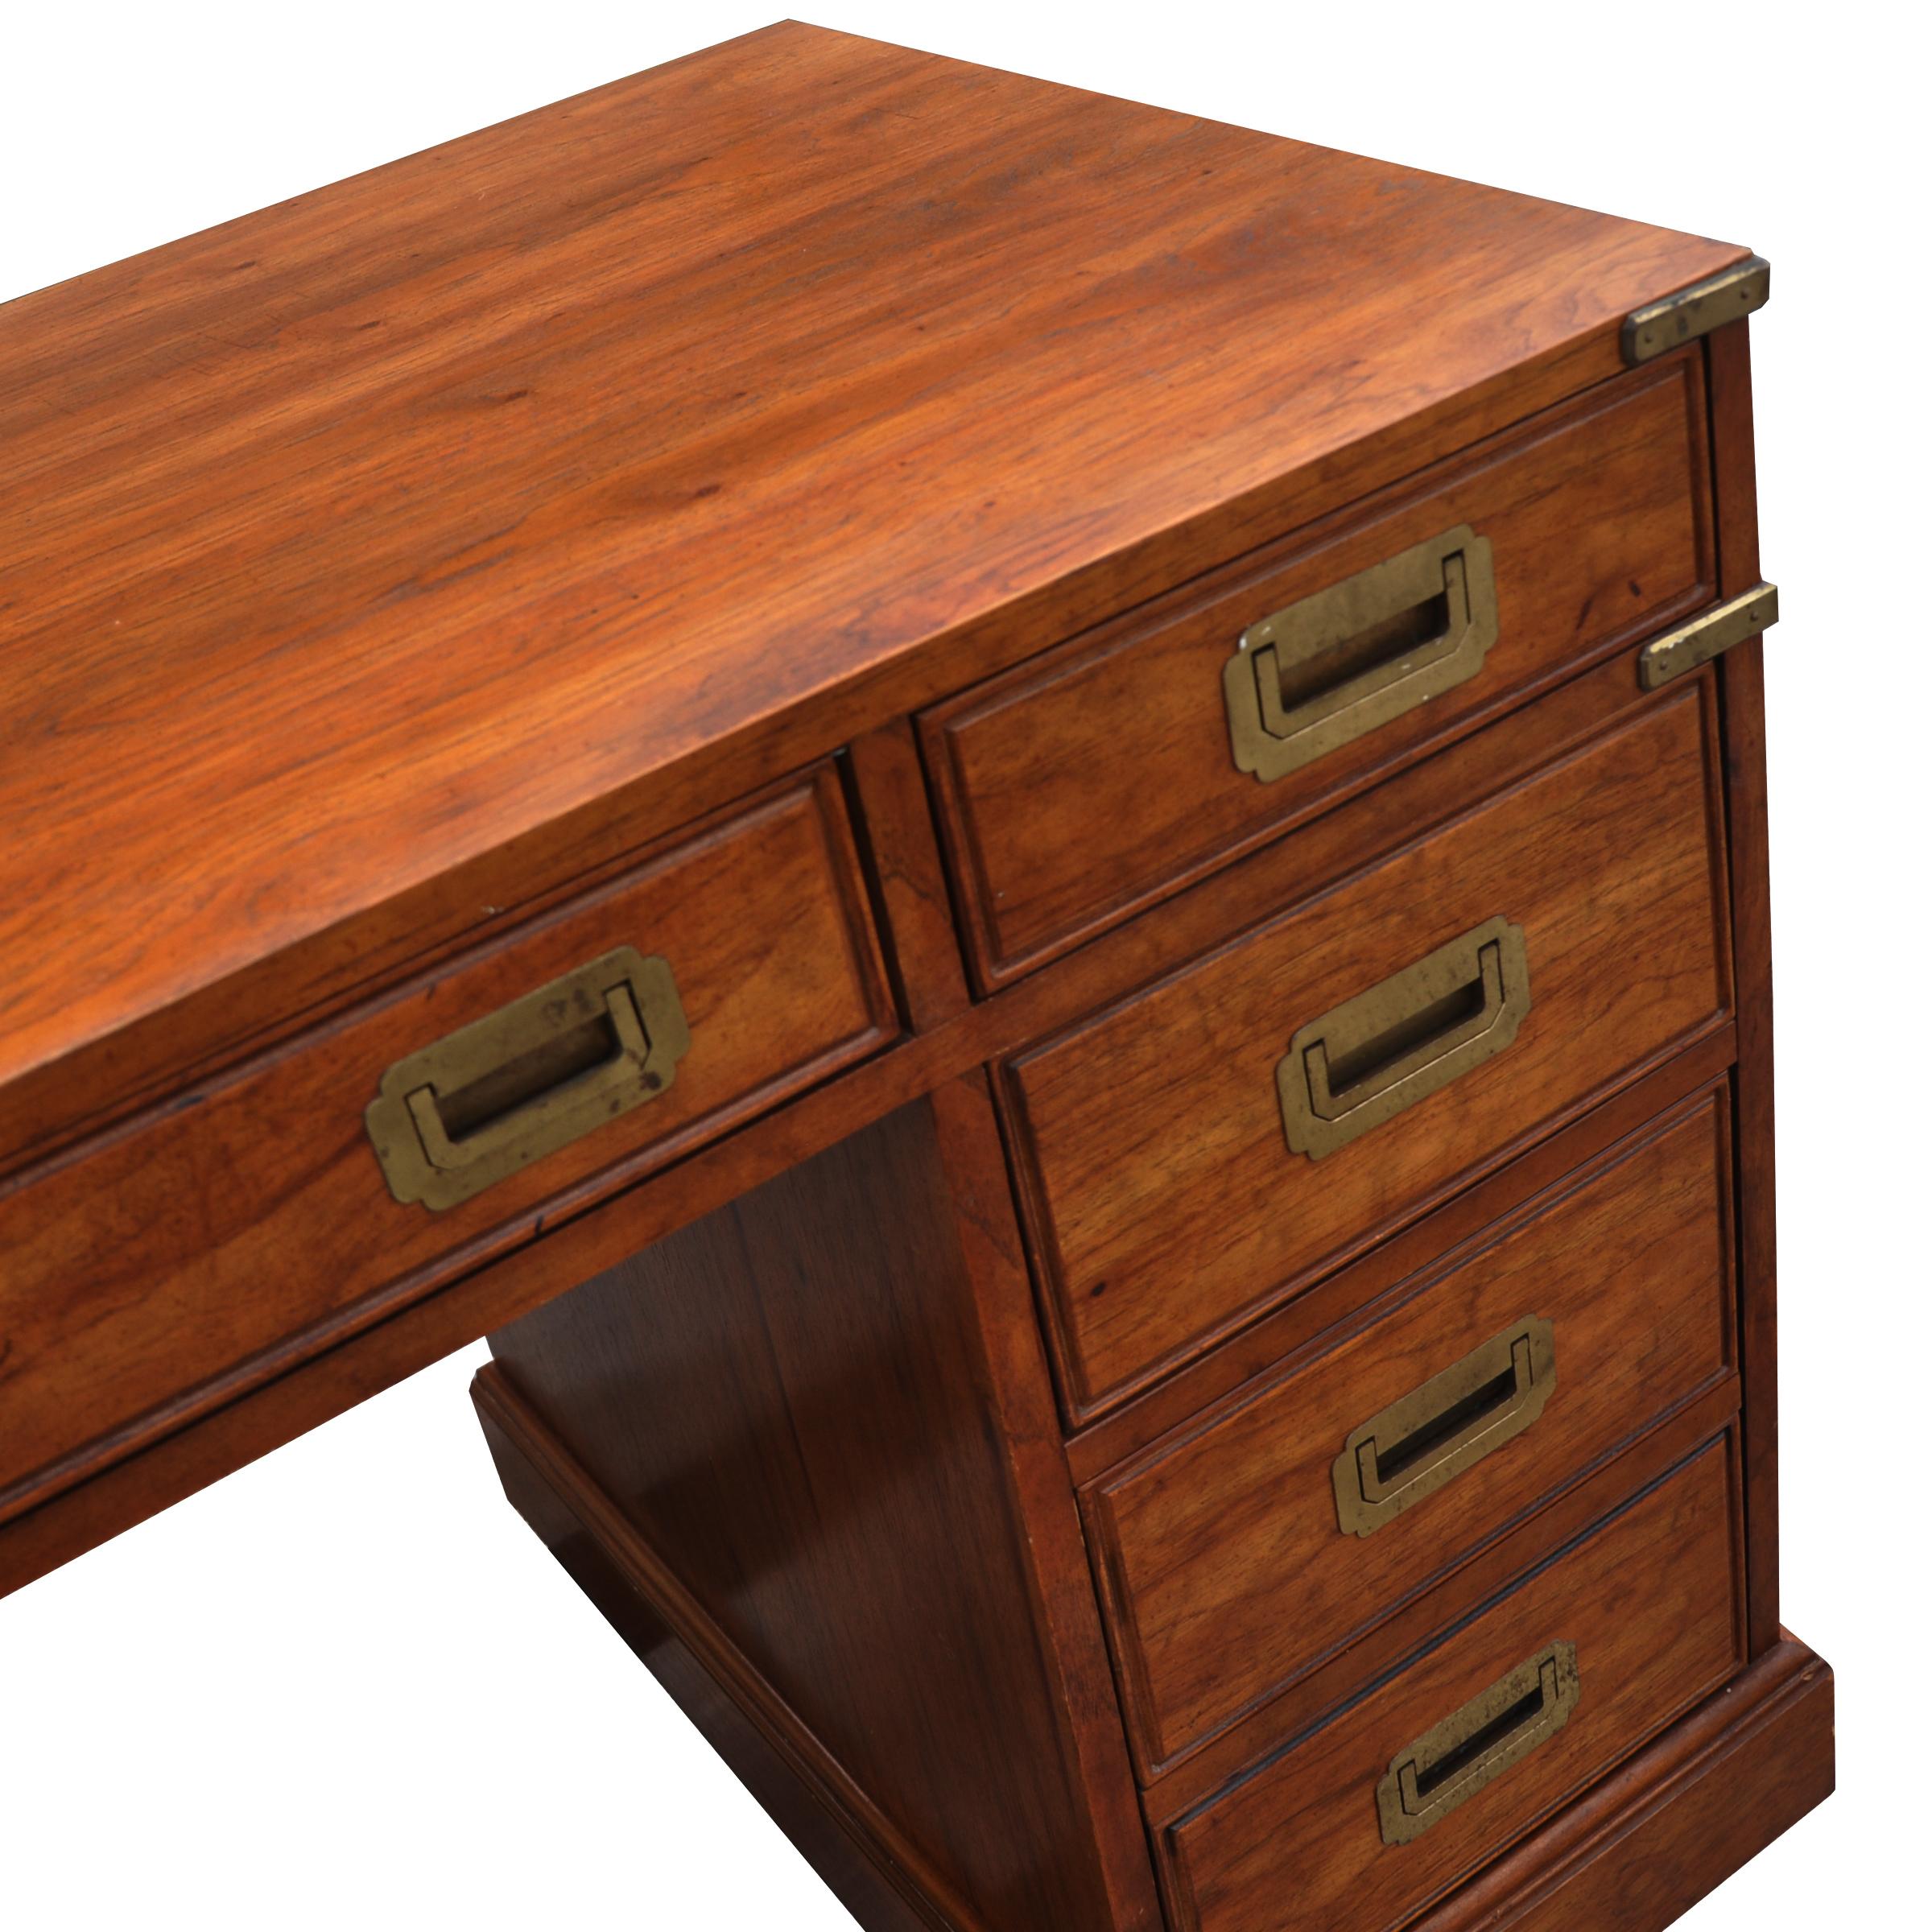 Oak Campaign Style Desk by National Mt. Airy